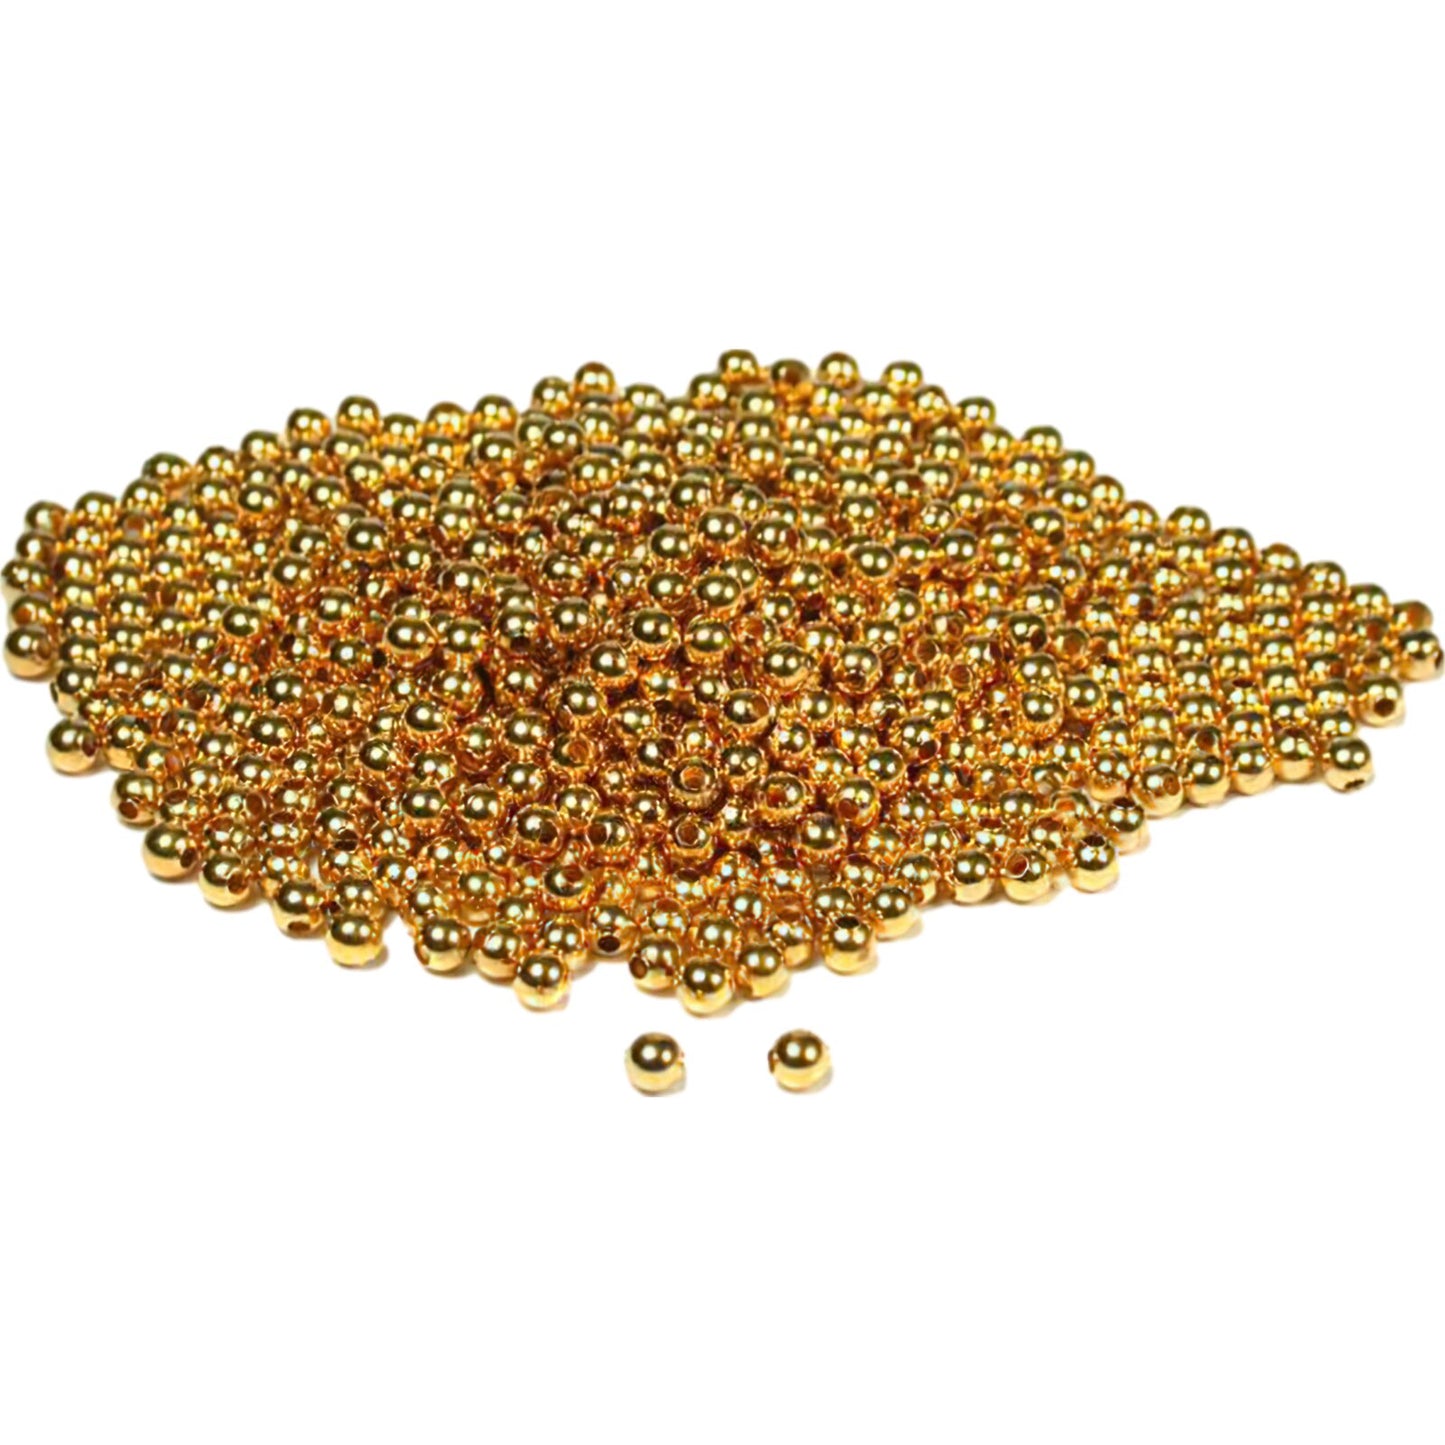 700 Round Beads Gold Plated Beading Ball Stringing 4mm